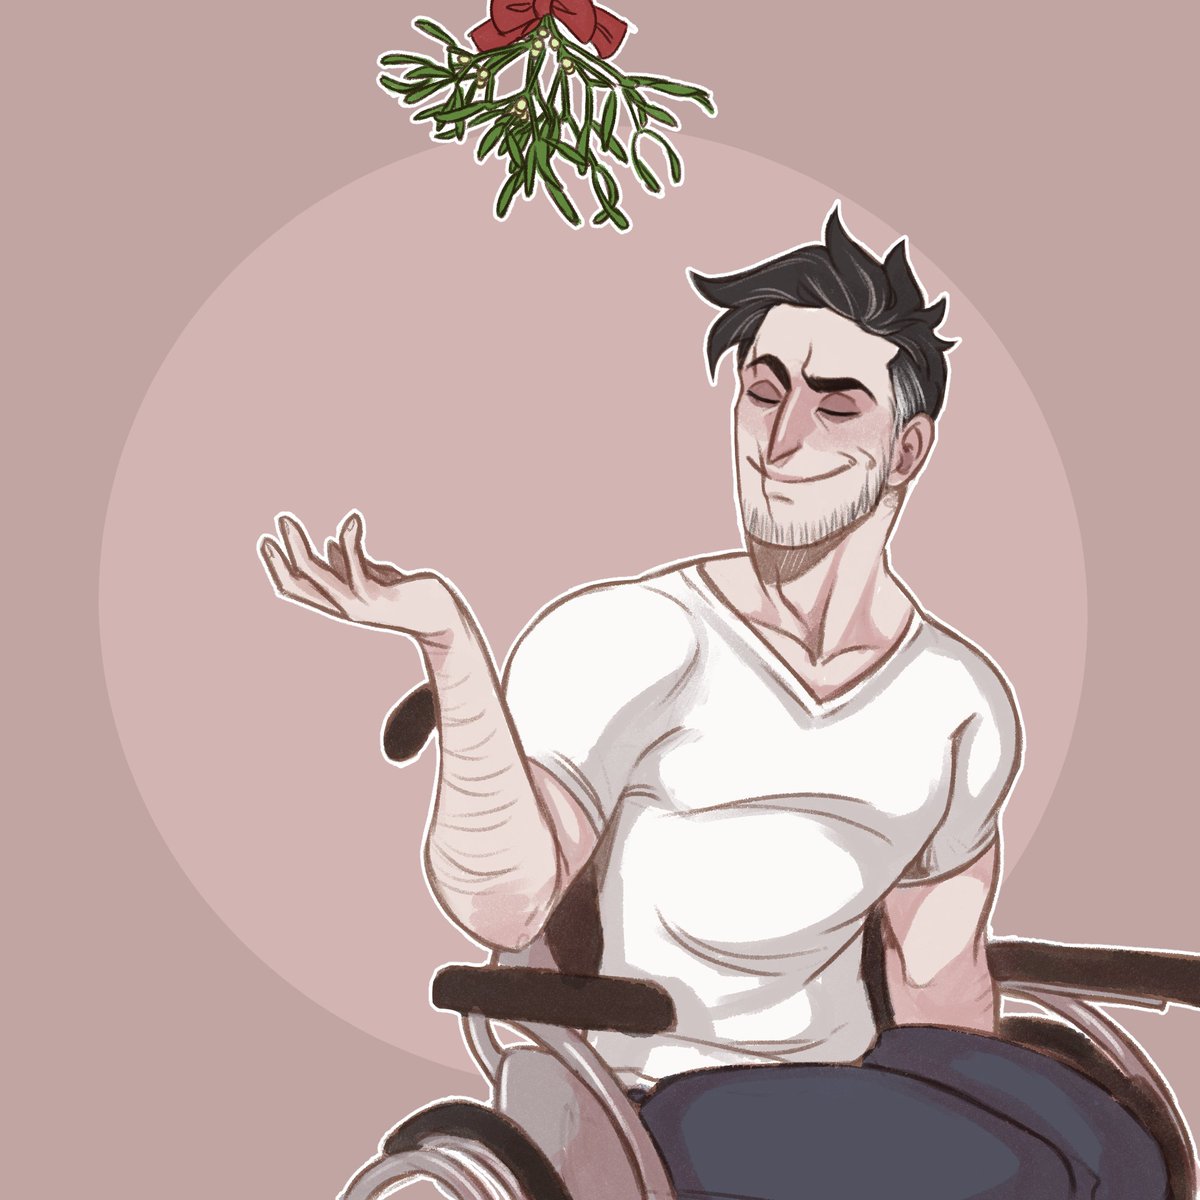 This old fart deserves some smooches and attention #ocmistletoe